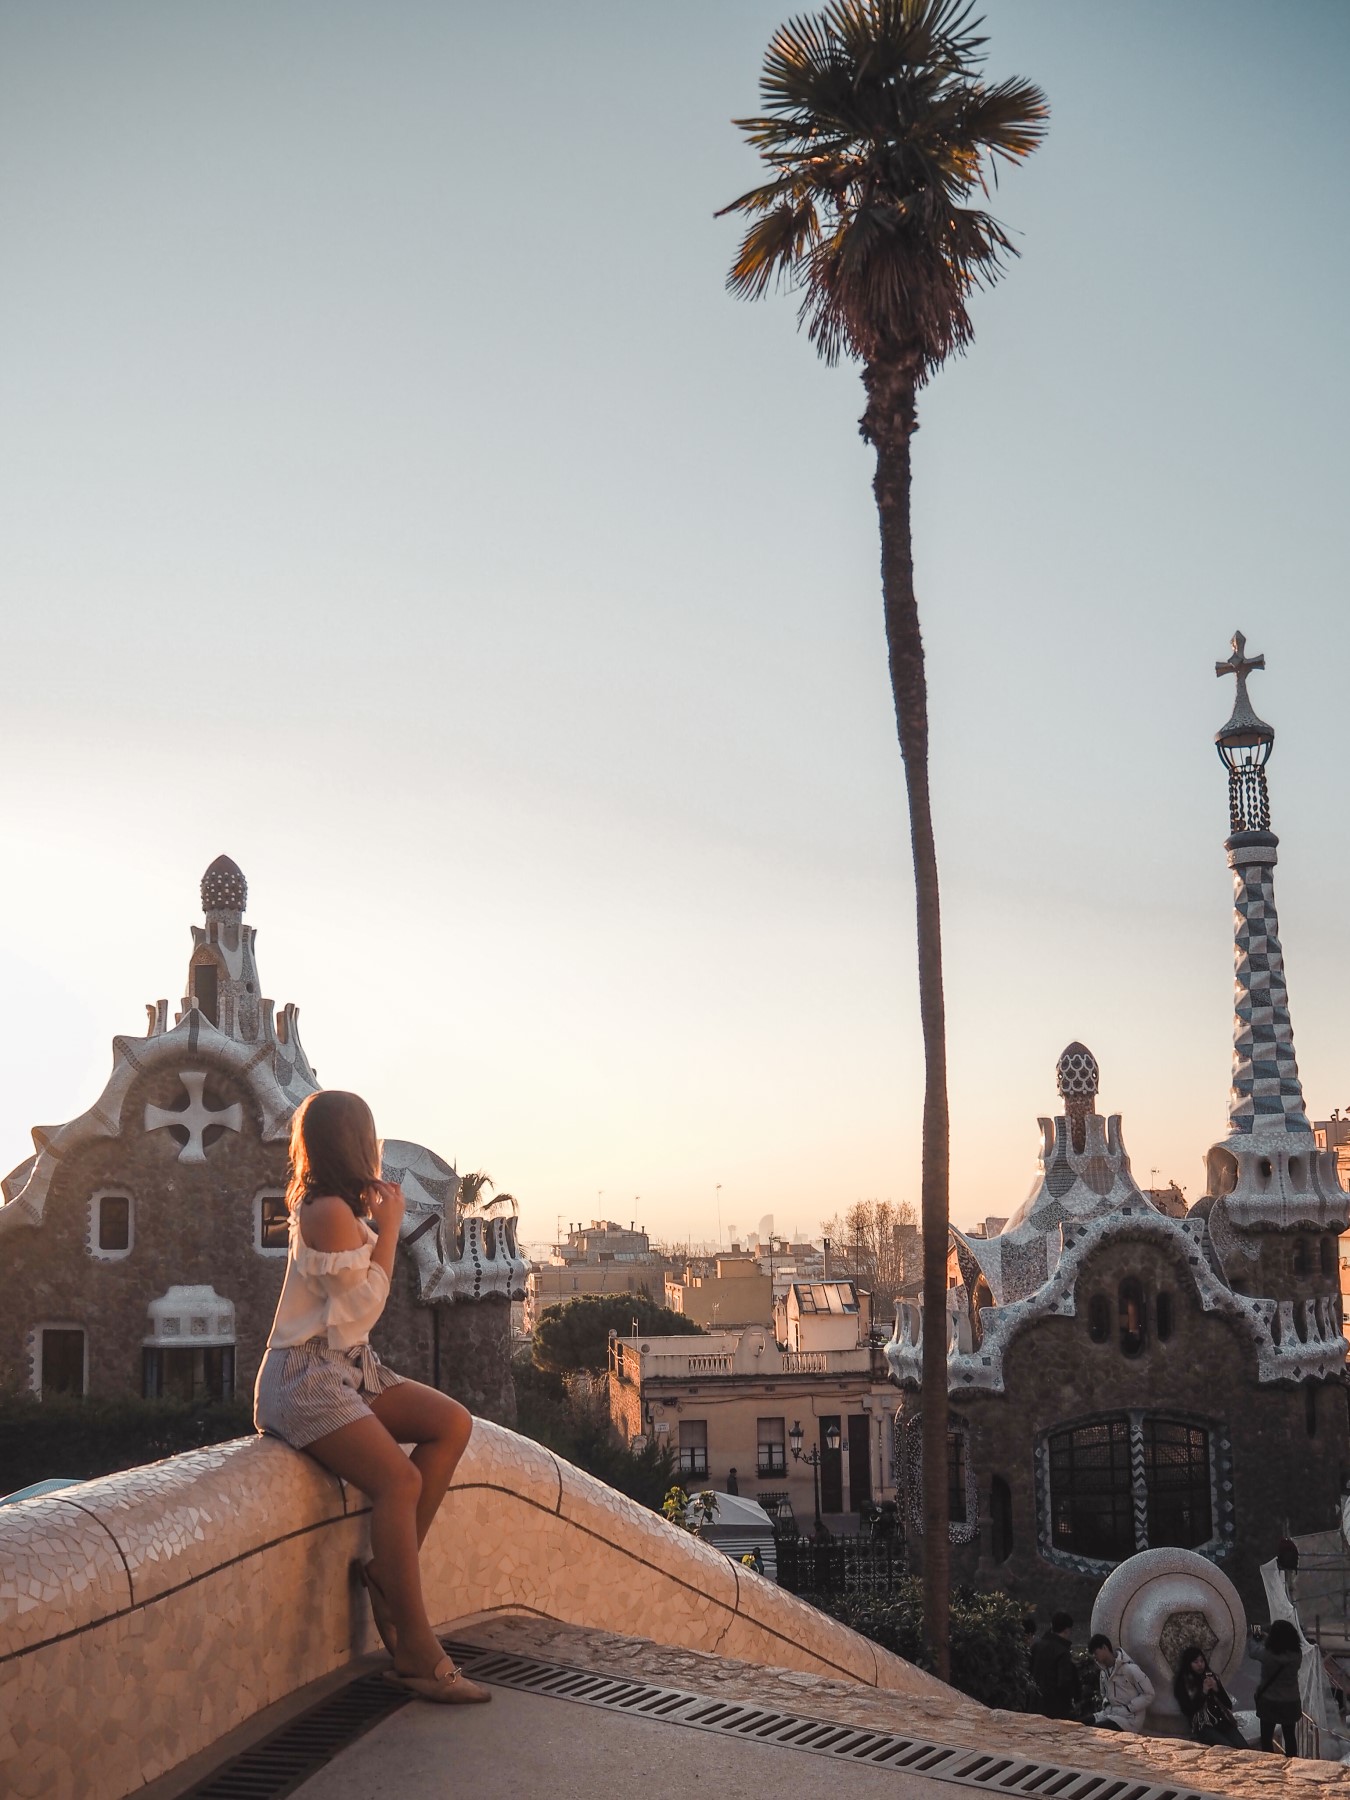 Where To Stay, Play, And Eat in Barcelona | lifestyletraveler.co | IG: @lifestyletraveler.co